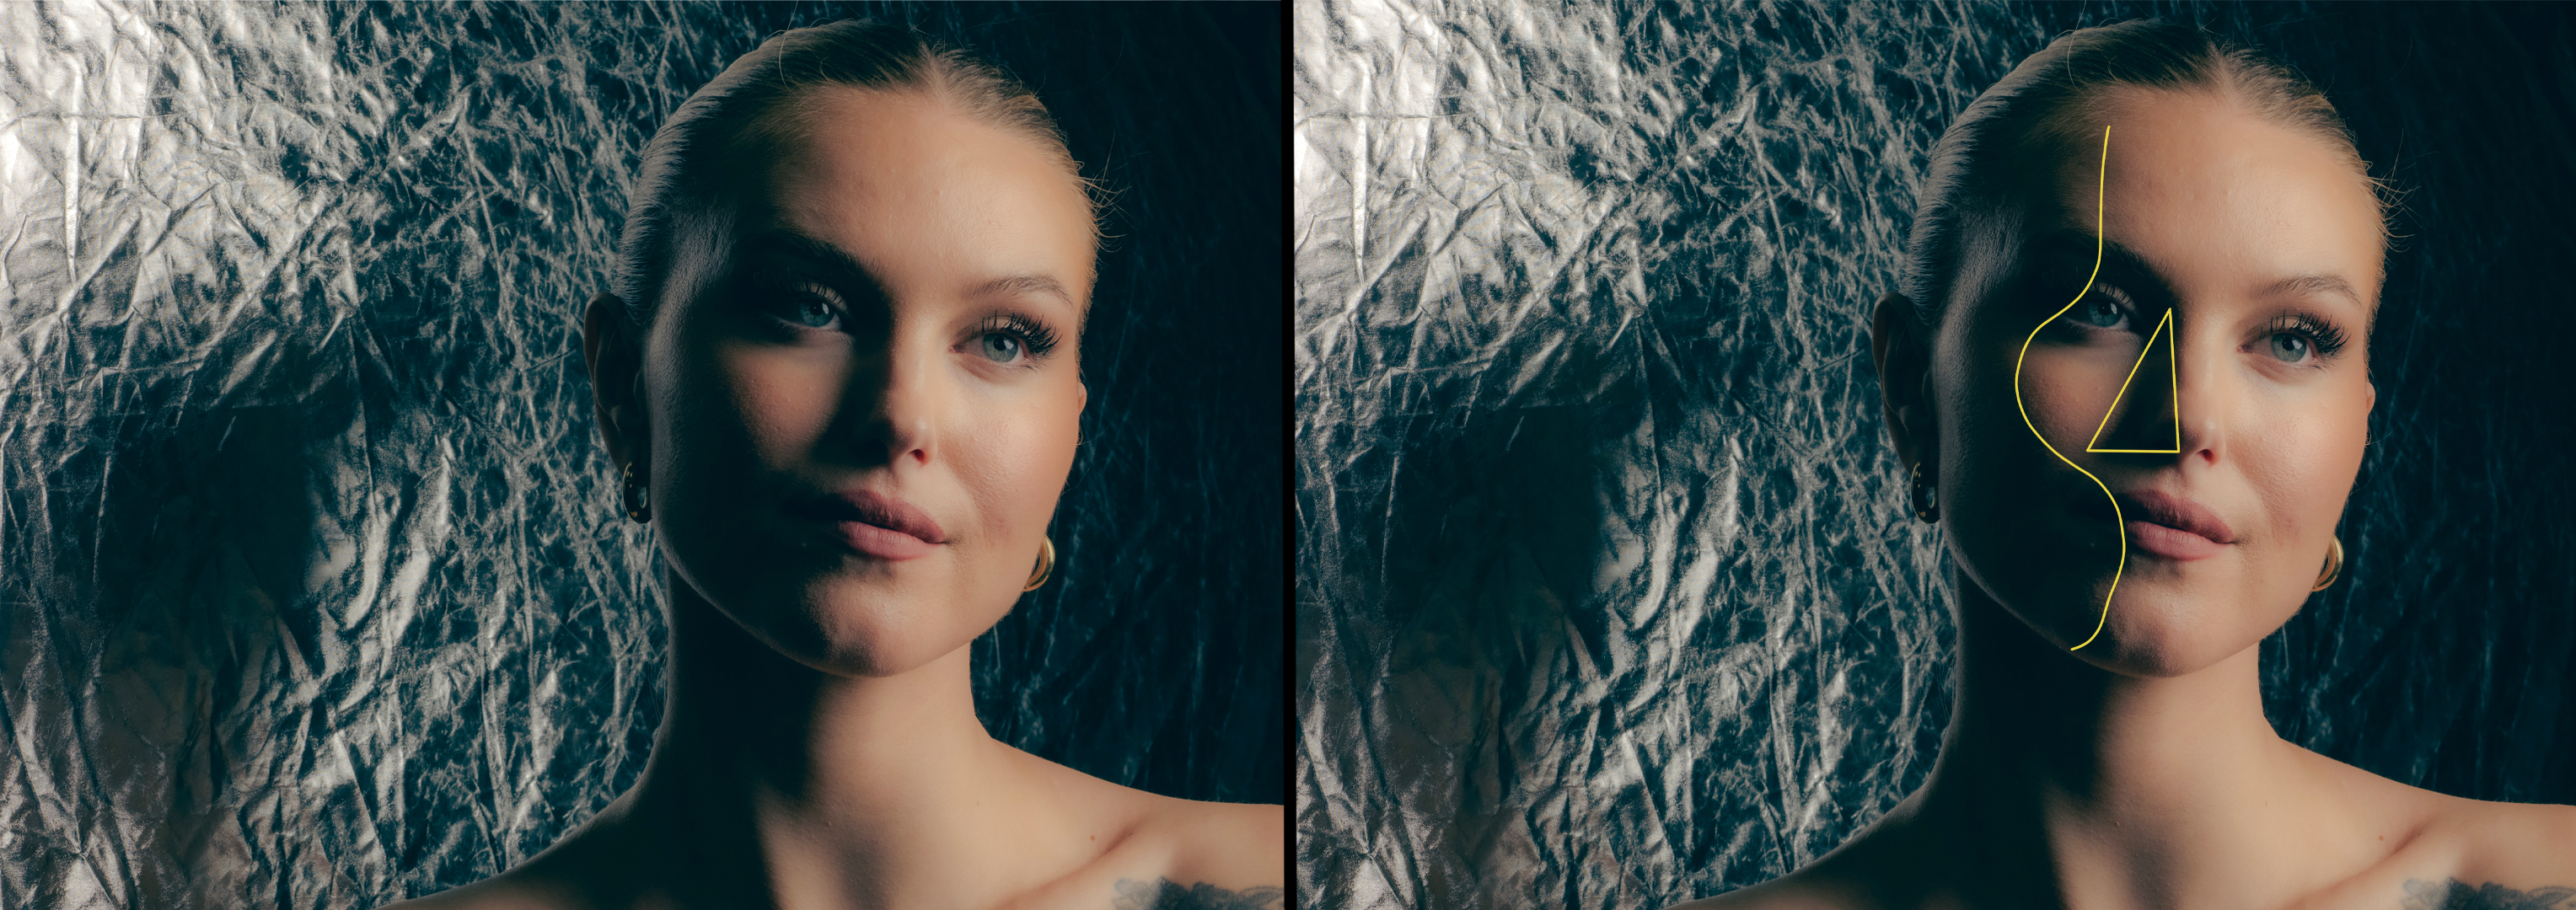 What is Rembrandt Lighting and How To Master It in Photography By EssentialPhoto